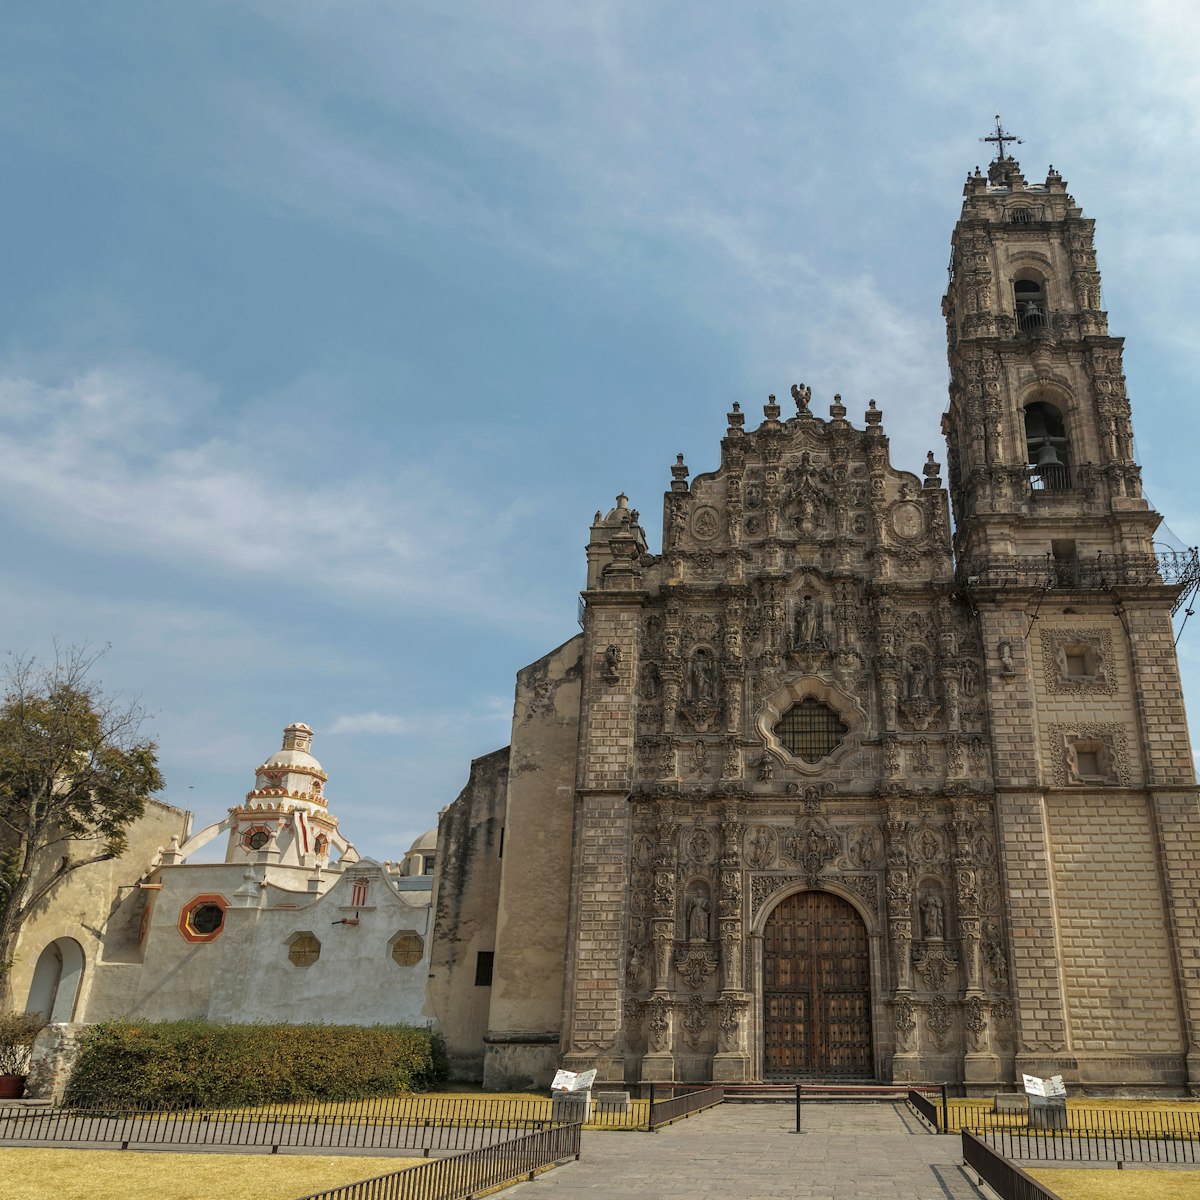 The temple of San Francisco Javier is part of the current National Museum of the Viceroyalty and former Jesuit College of San Francisco Javier, located in Tepotzotlán.